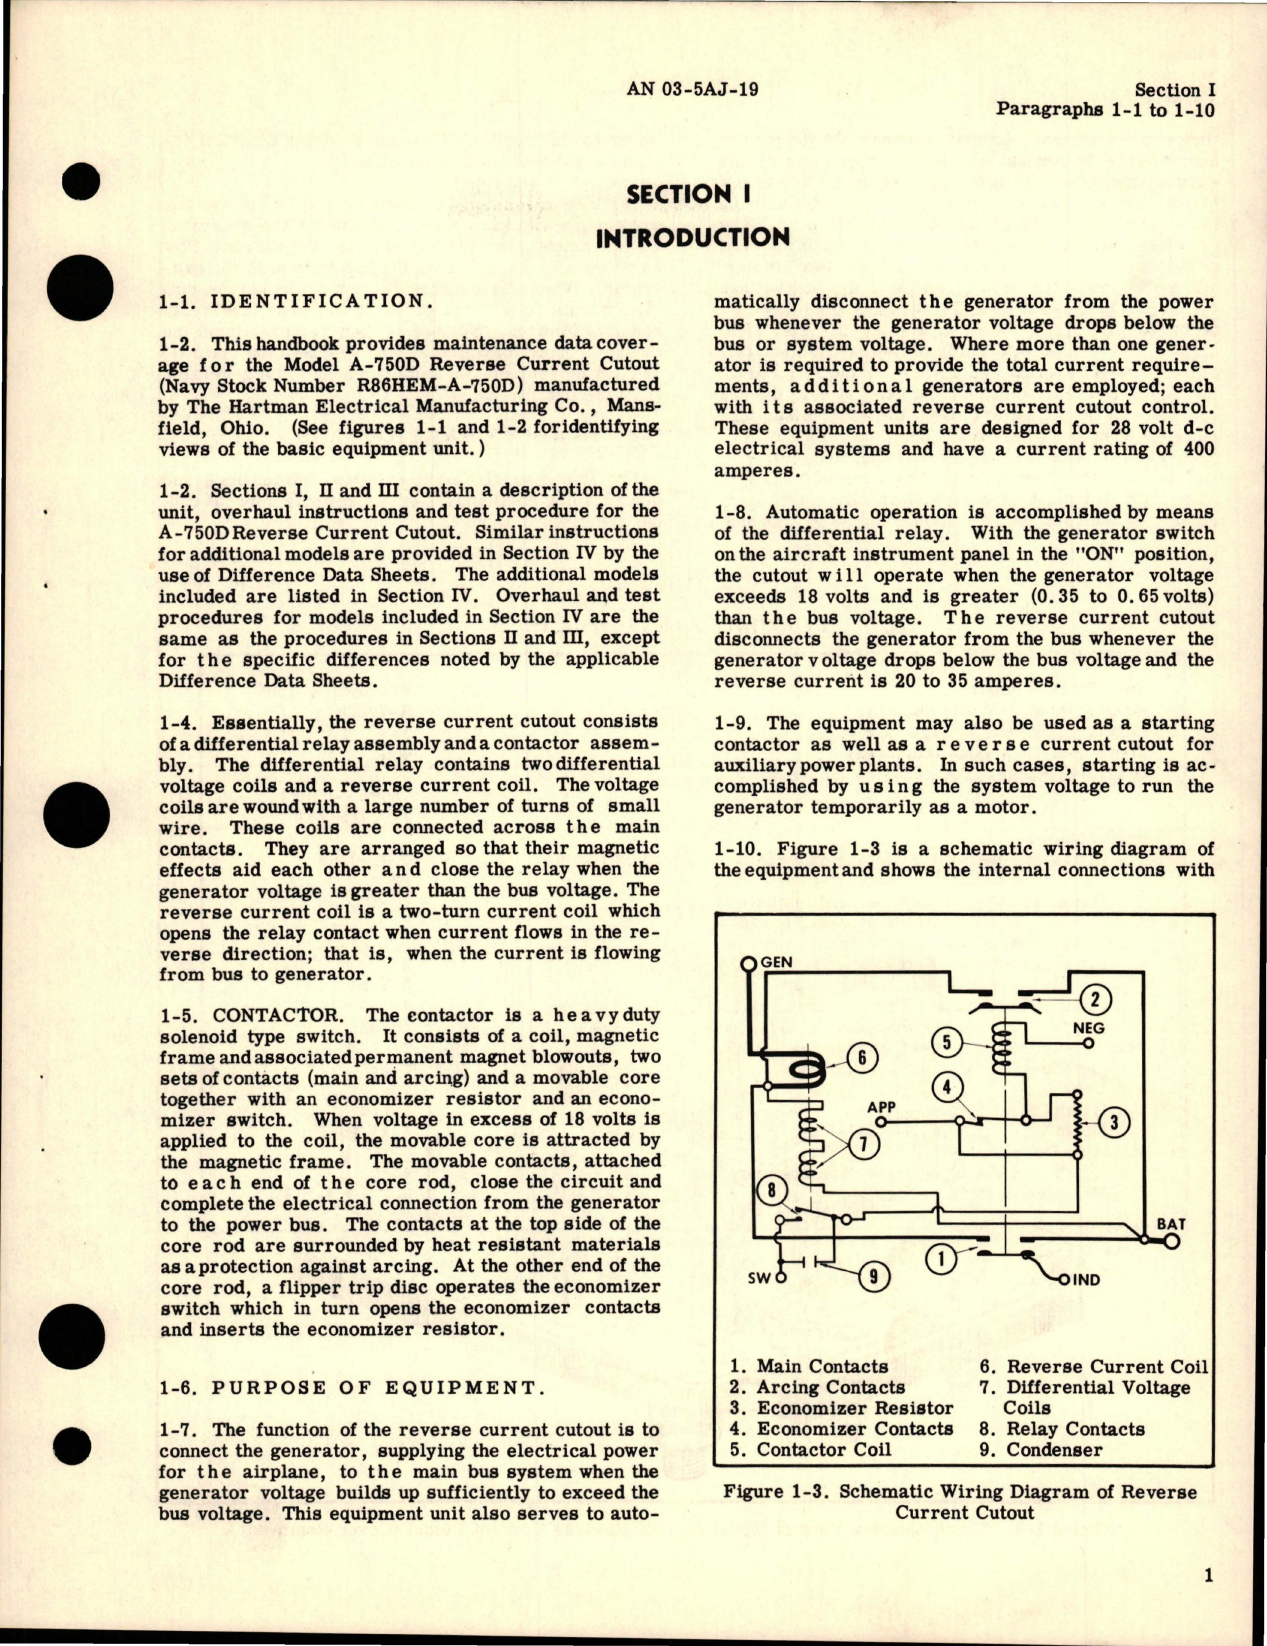 Sample page 5 from AirCorps Library document: Overhaul Instructions for Reverse Current Cutout - Model A-750D and Contactors - Models A-751D and A-751E